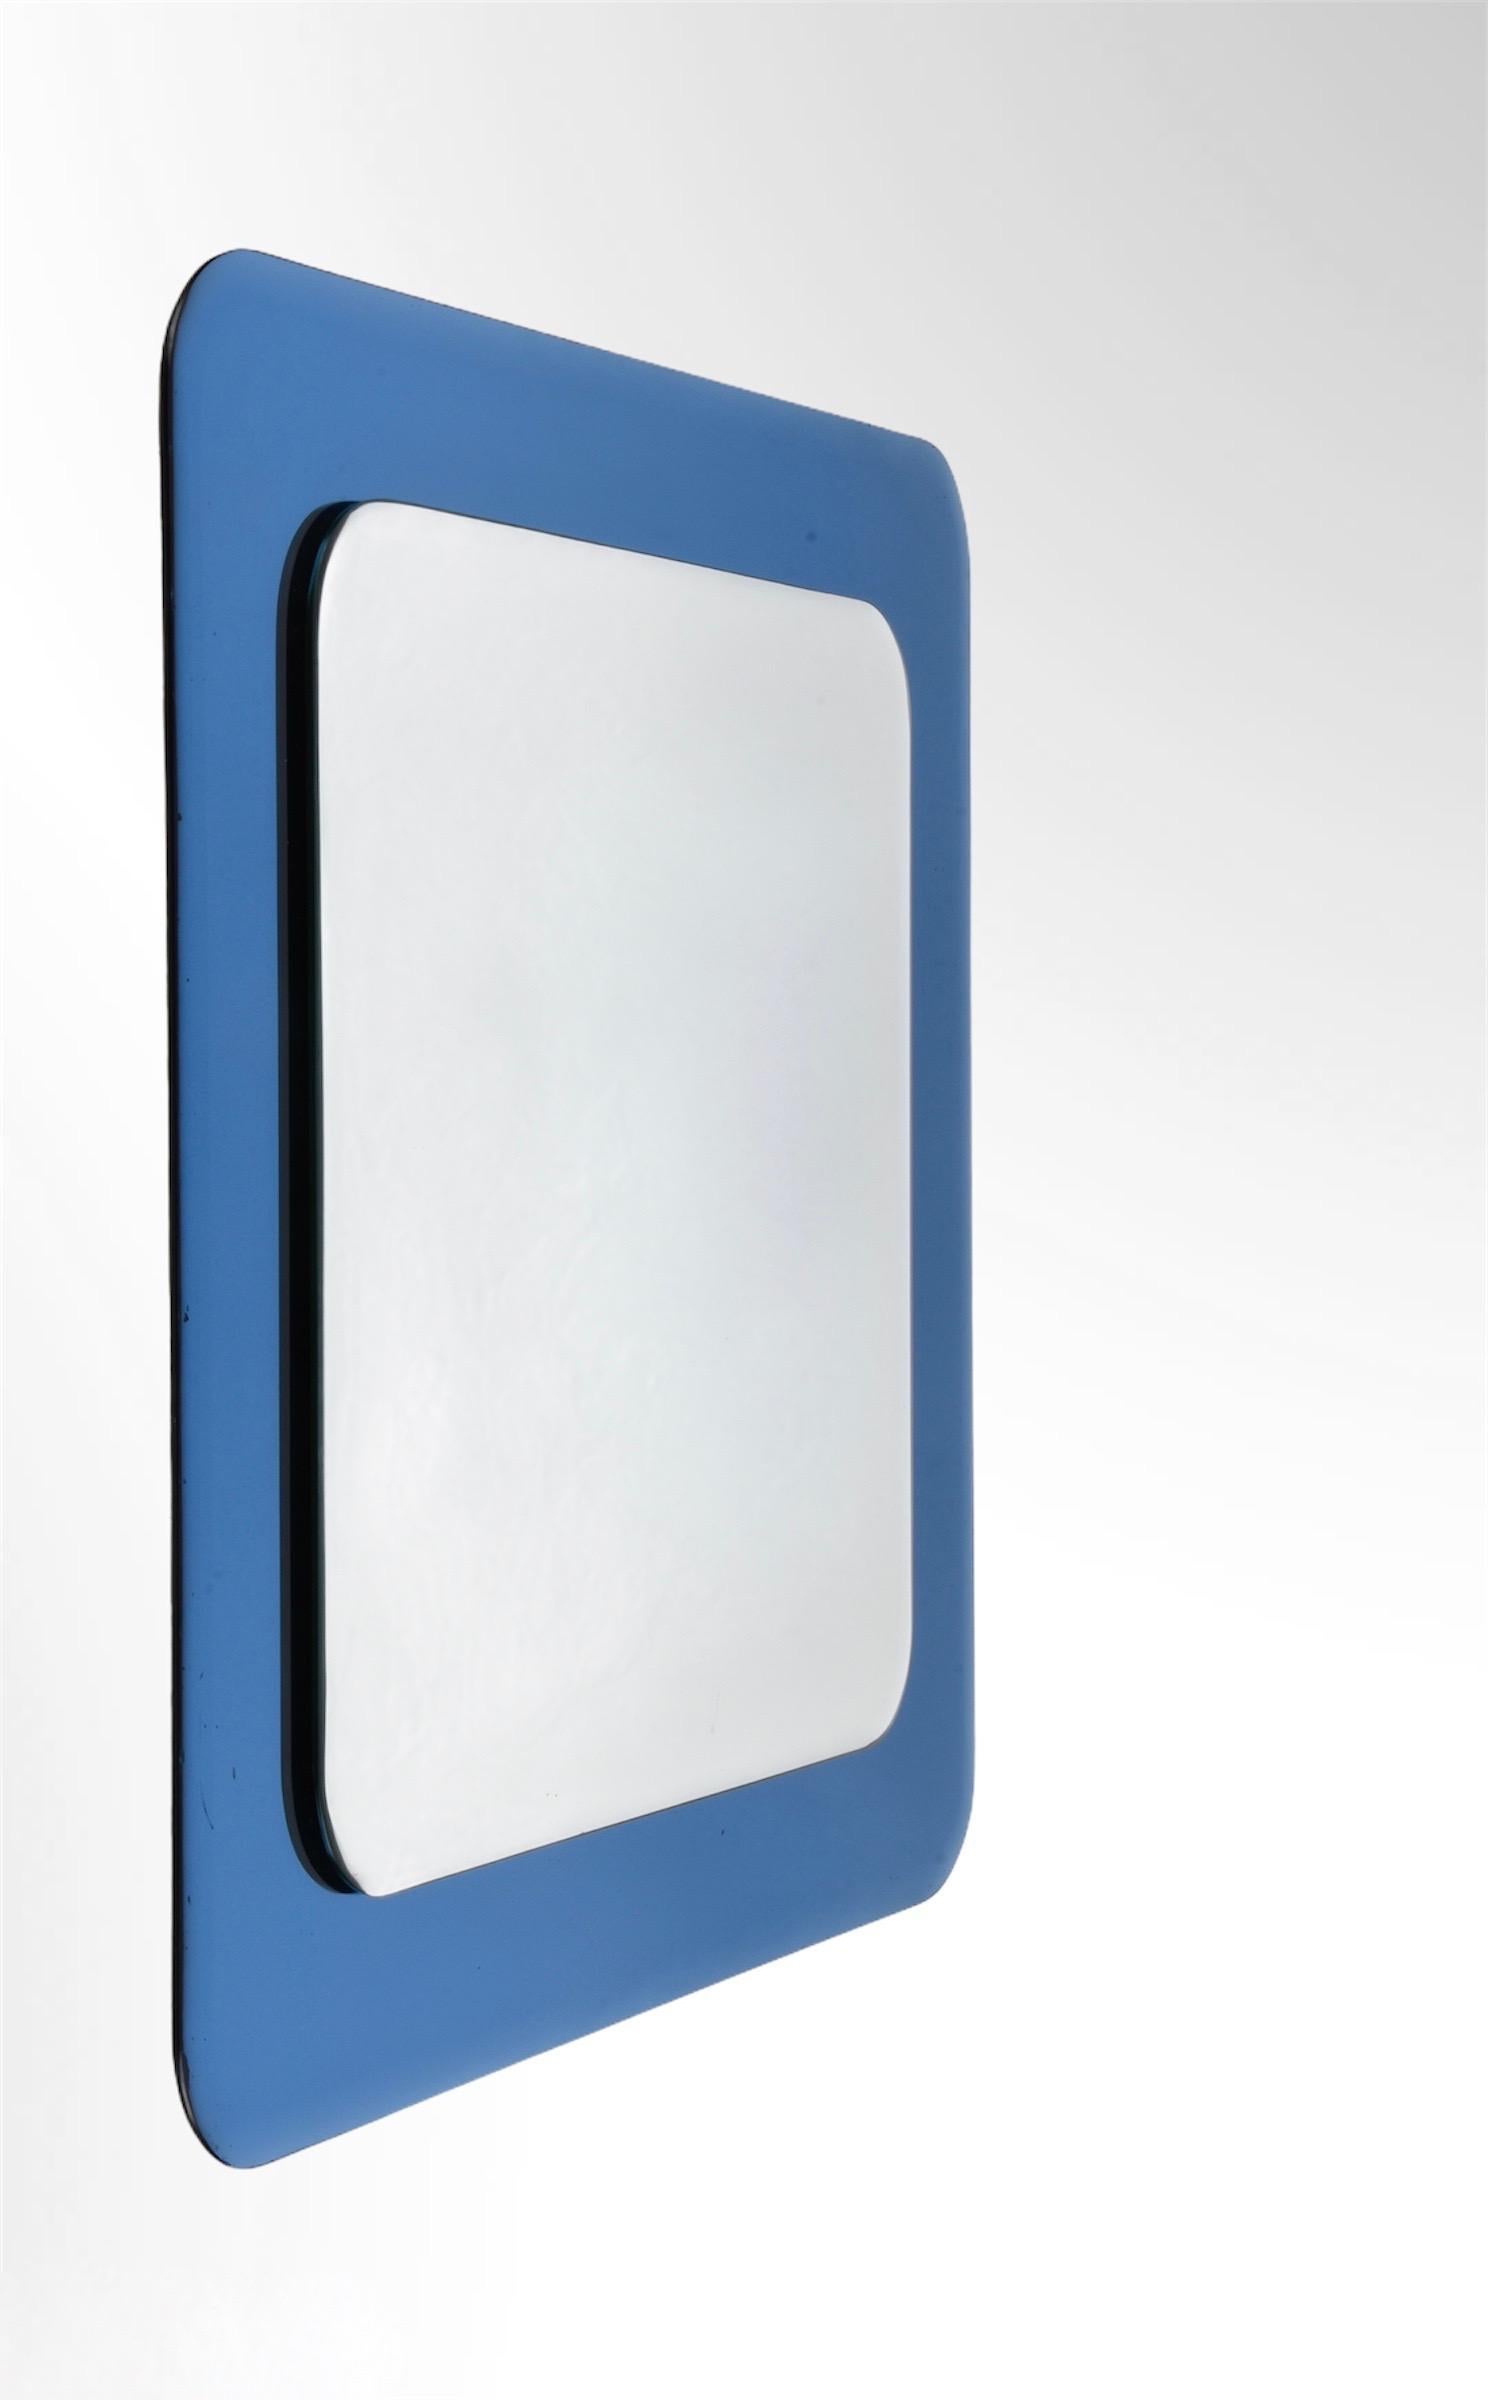 Mid-20th Century Midcentury Cristal Art Square Italian Wall Mirror with Blue Glass Frame, 1960s For Sale